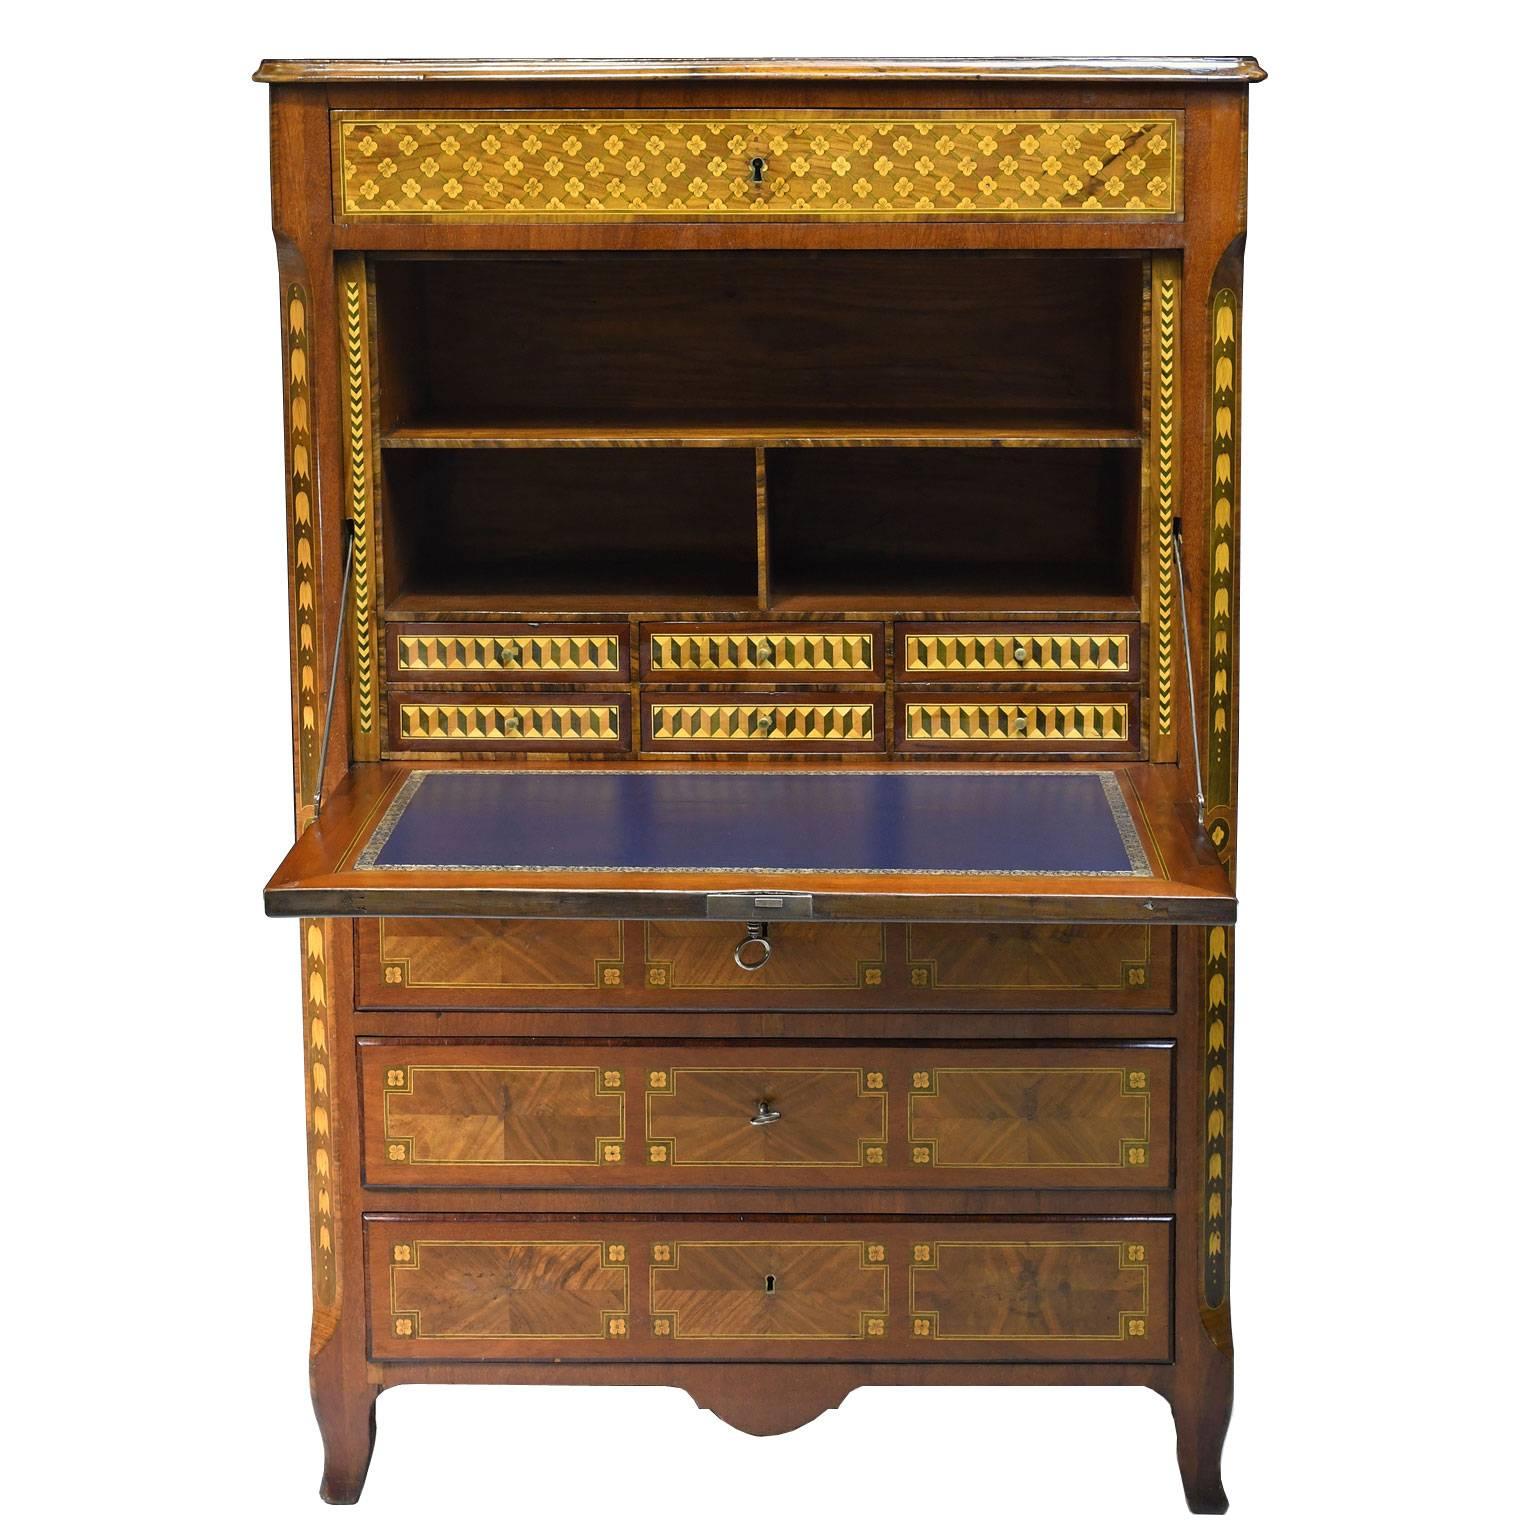 This understated but elegant bureau cabinet is composed of three sections decorated with colorful and contrasting marquetry throughout, depicting ornamental motifs using lemonwood and eucalyptus over mahogany. 
The upper section offers a drawer